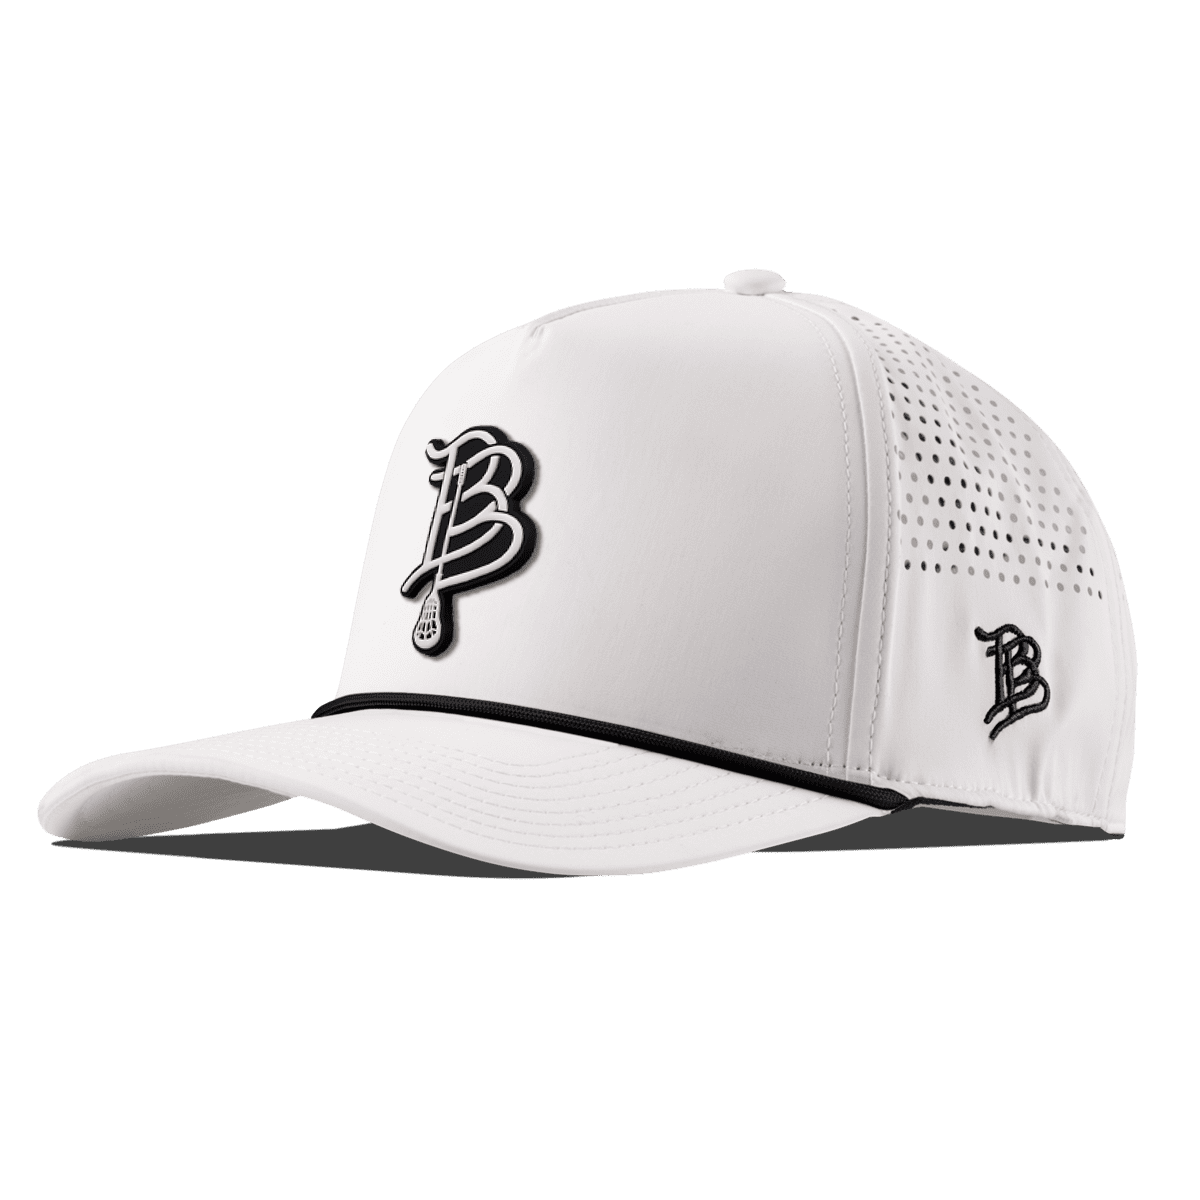 BB Lacrosse Cutout PVC Curved 5 Panel Rope